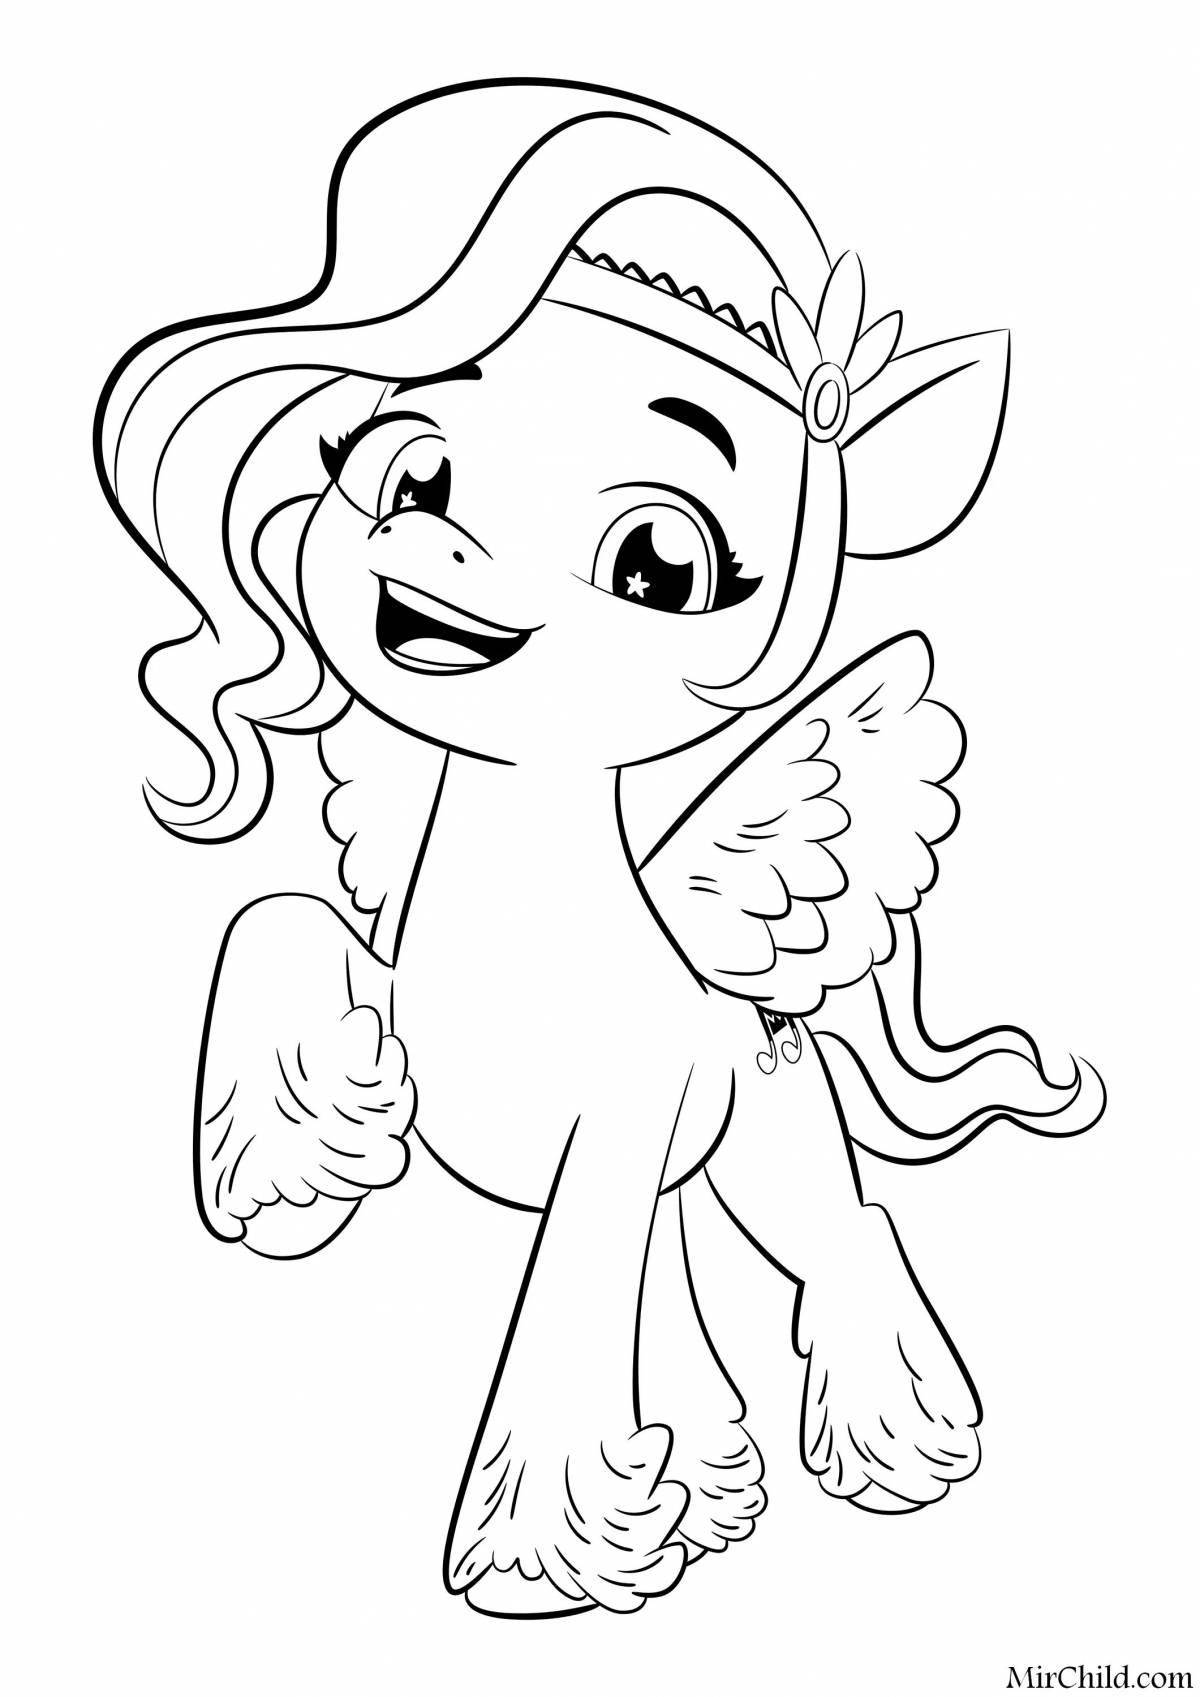 Fancy little ponies new generation coloring book